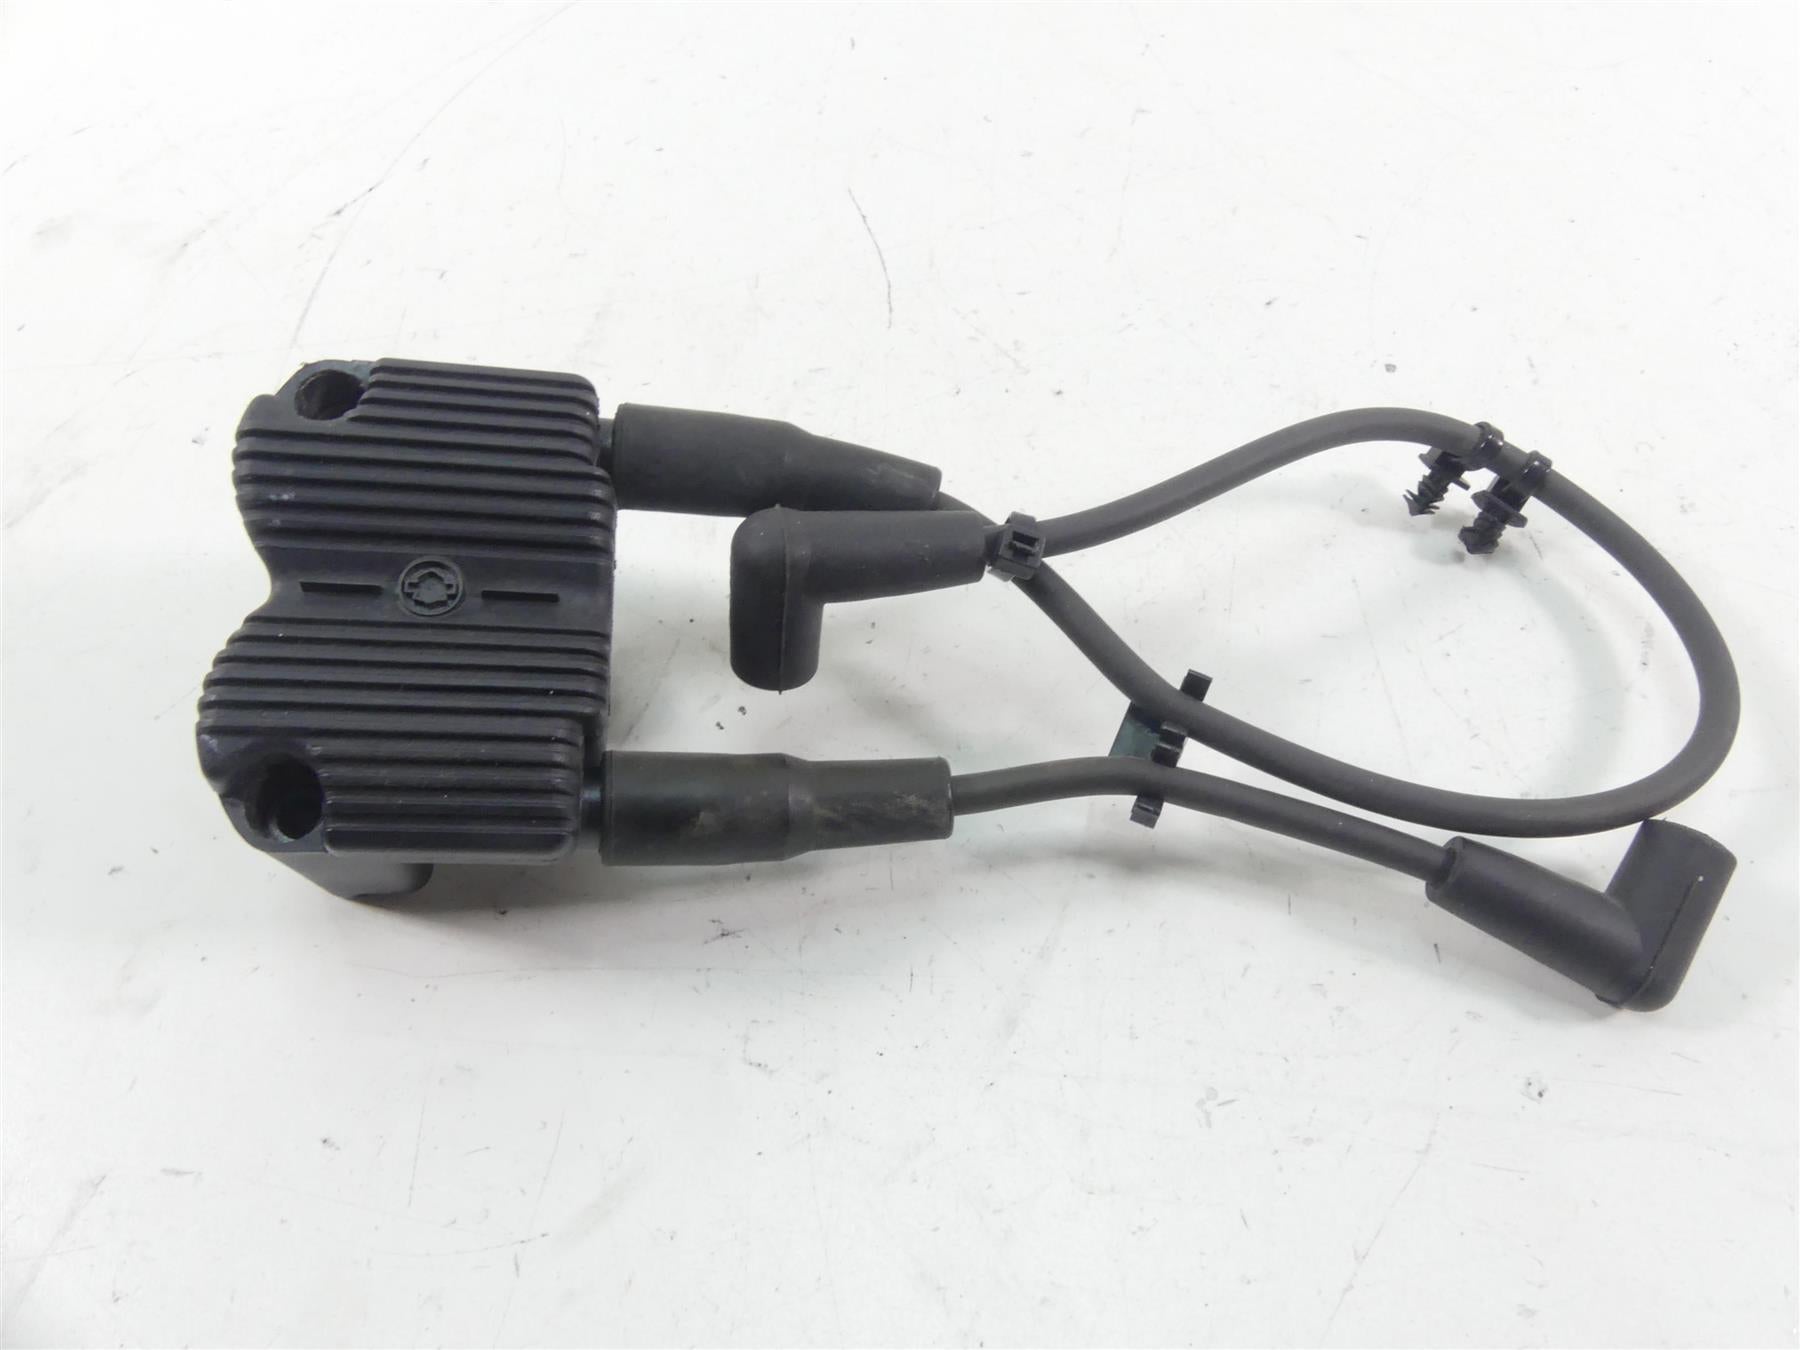 2010 Harley FXDWG Dyna Wide Glide Delphi Ignition Coil Wires & Plugs 31743-01 | Mototech271